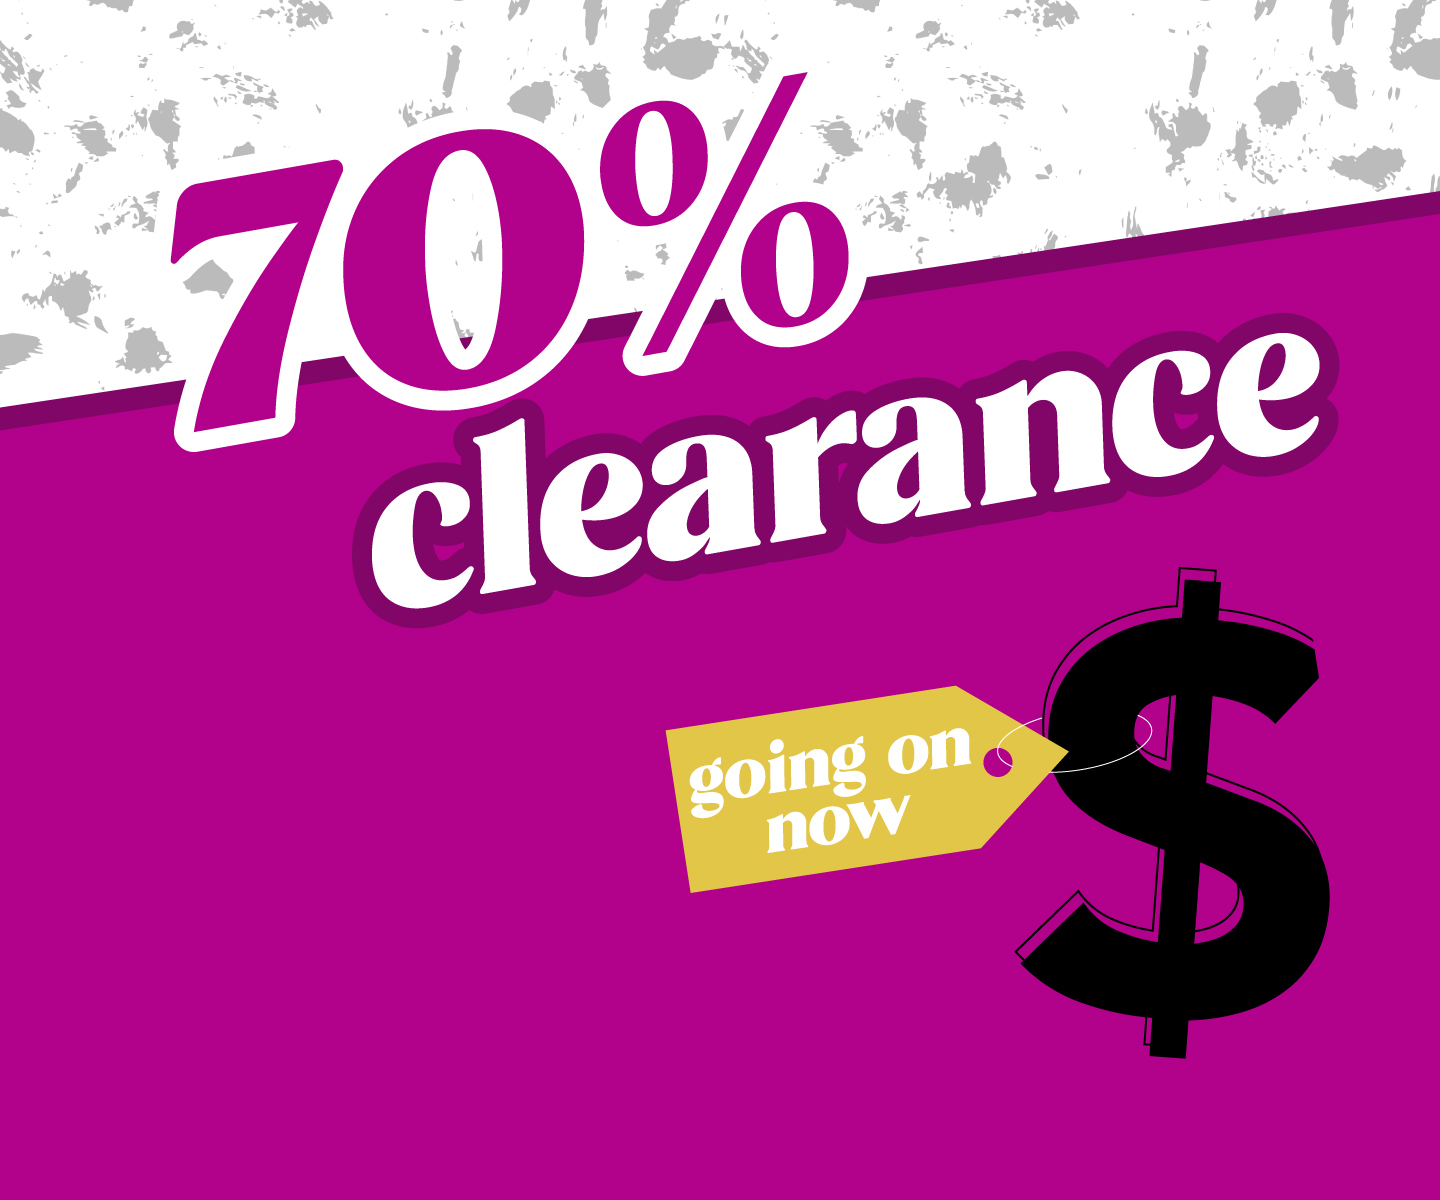 70% Off Clearance